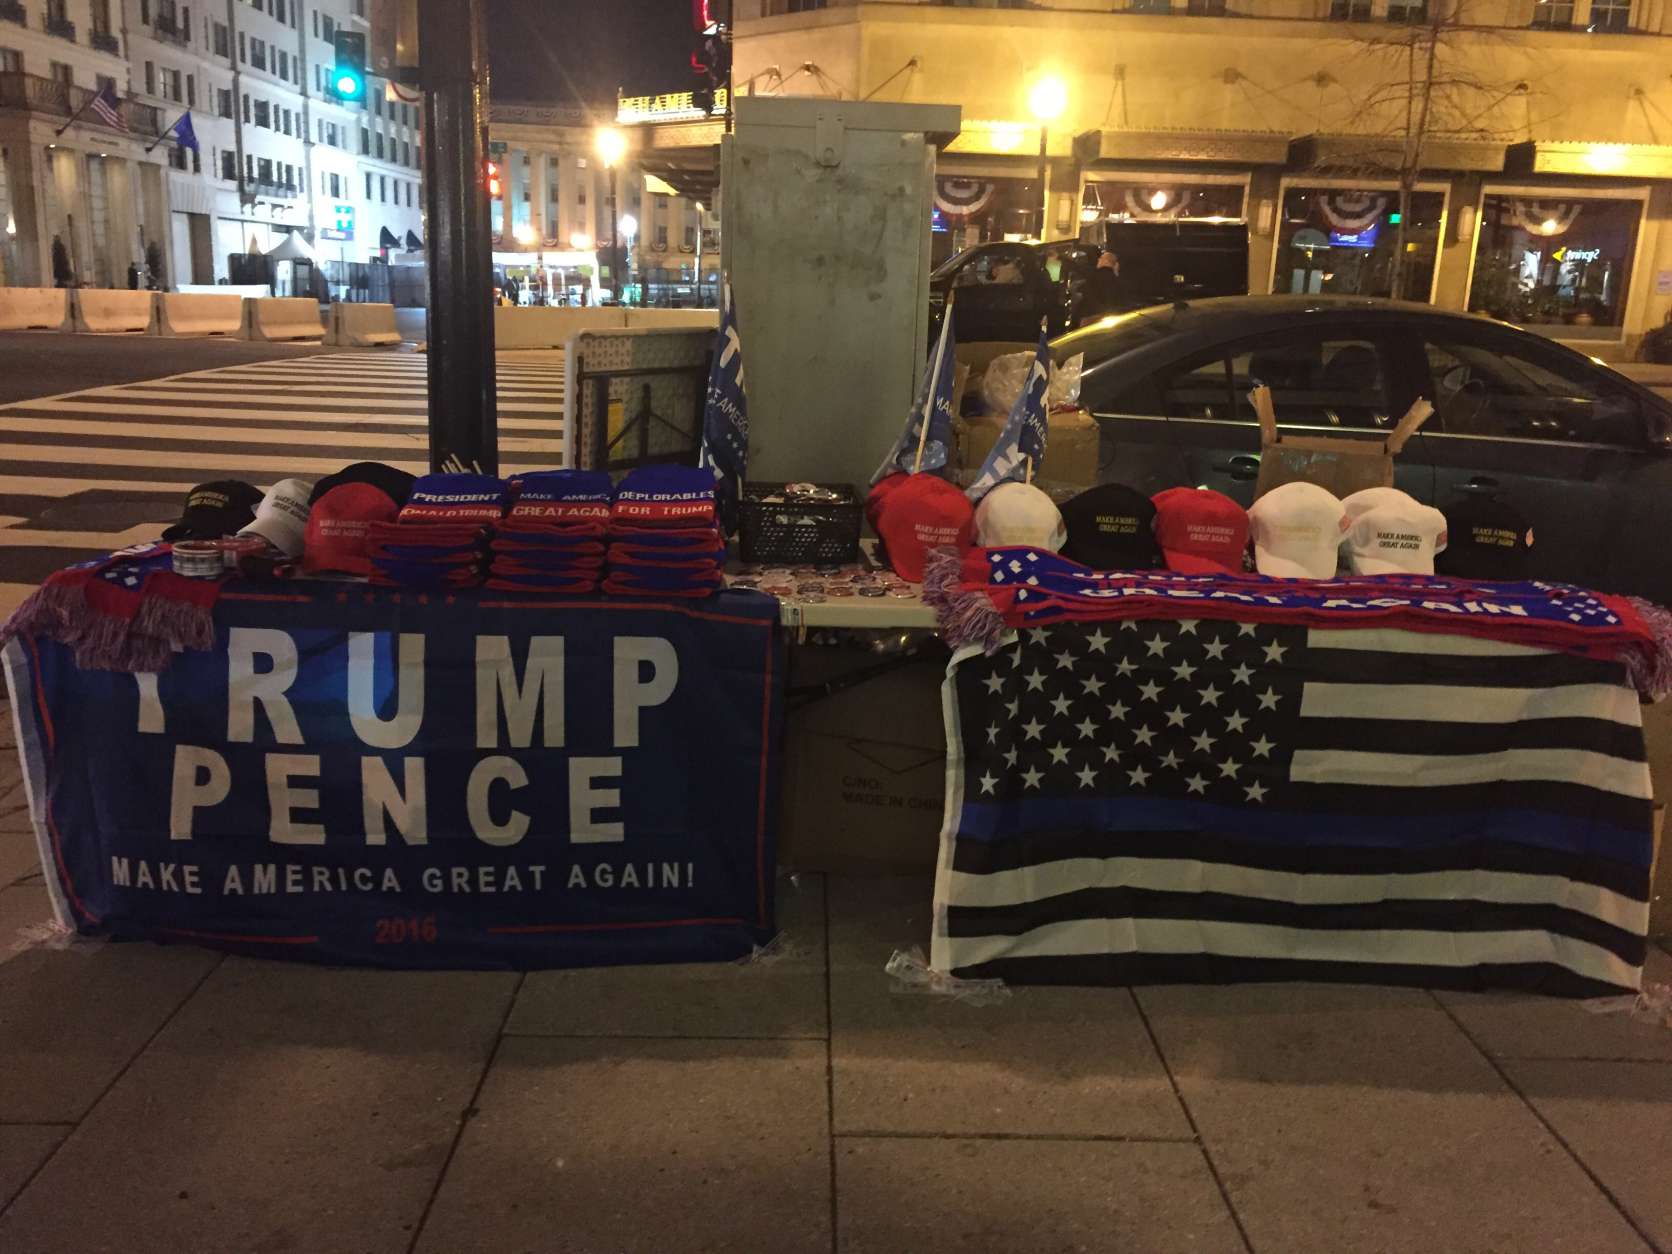 A New Yorker headed to New York University sells Trump merchandise near the White House early Friday morning. (WTOP/Dennis Foley)